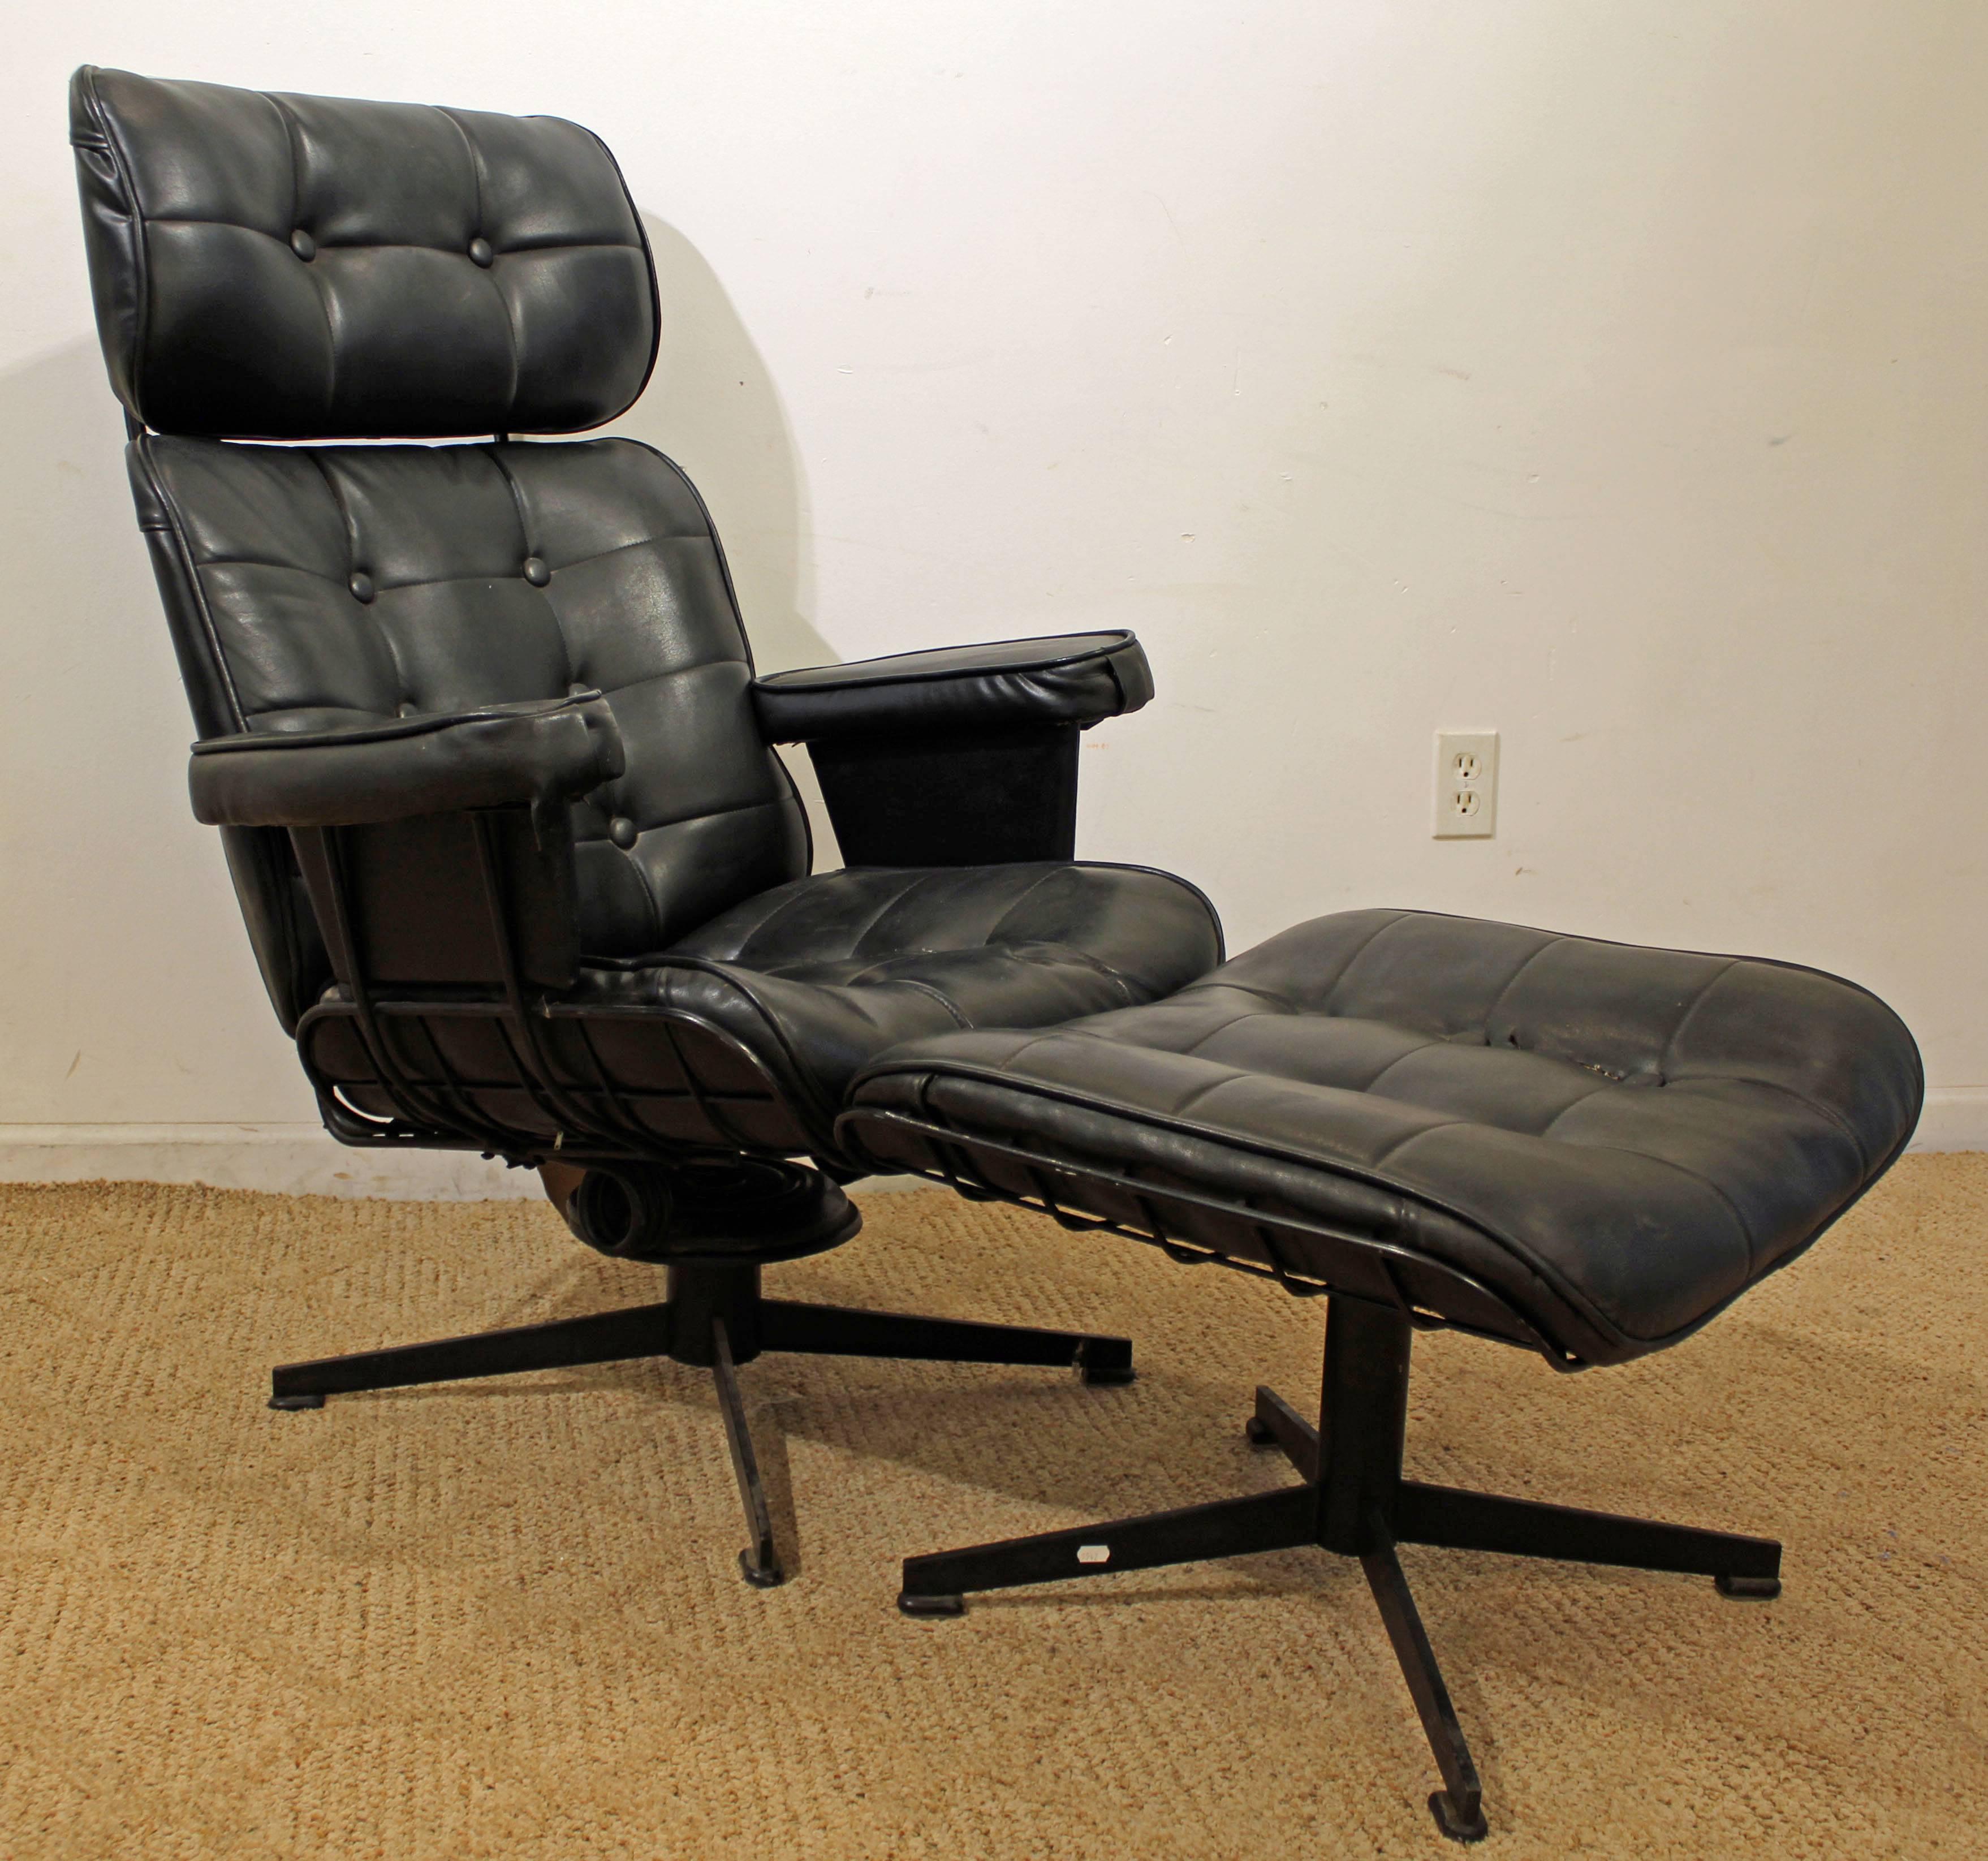 Offered is a Homecrest Bottemiller lounge chair B99T & Ottoman B610. The chair swivels and rocks. It is signed by Homecrest. 

Approximate dimensions:
Chair: 31